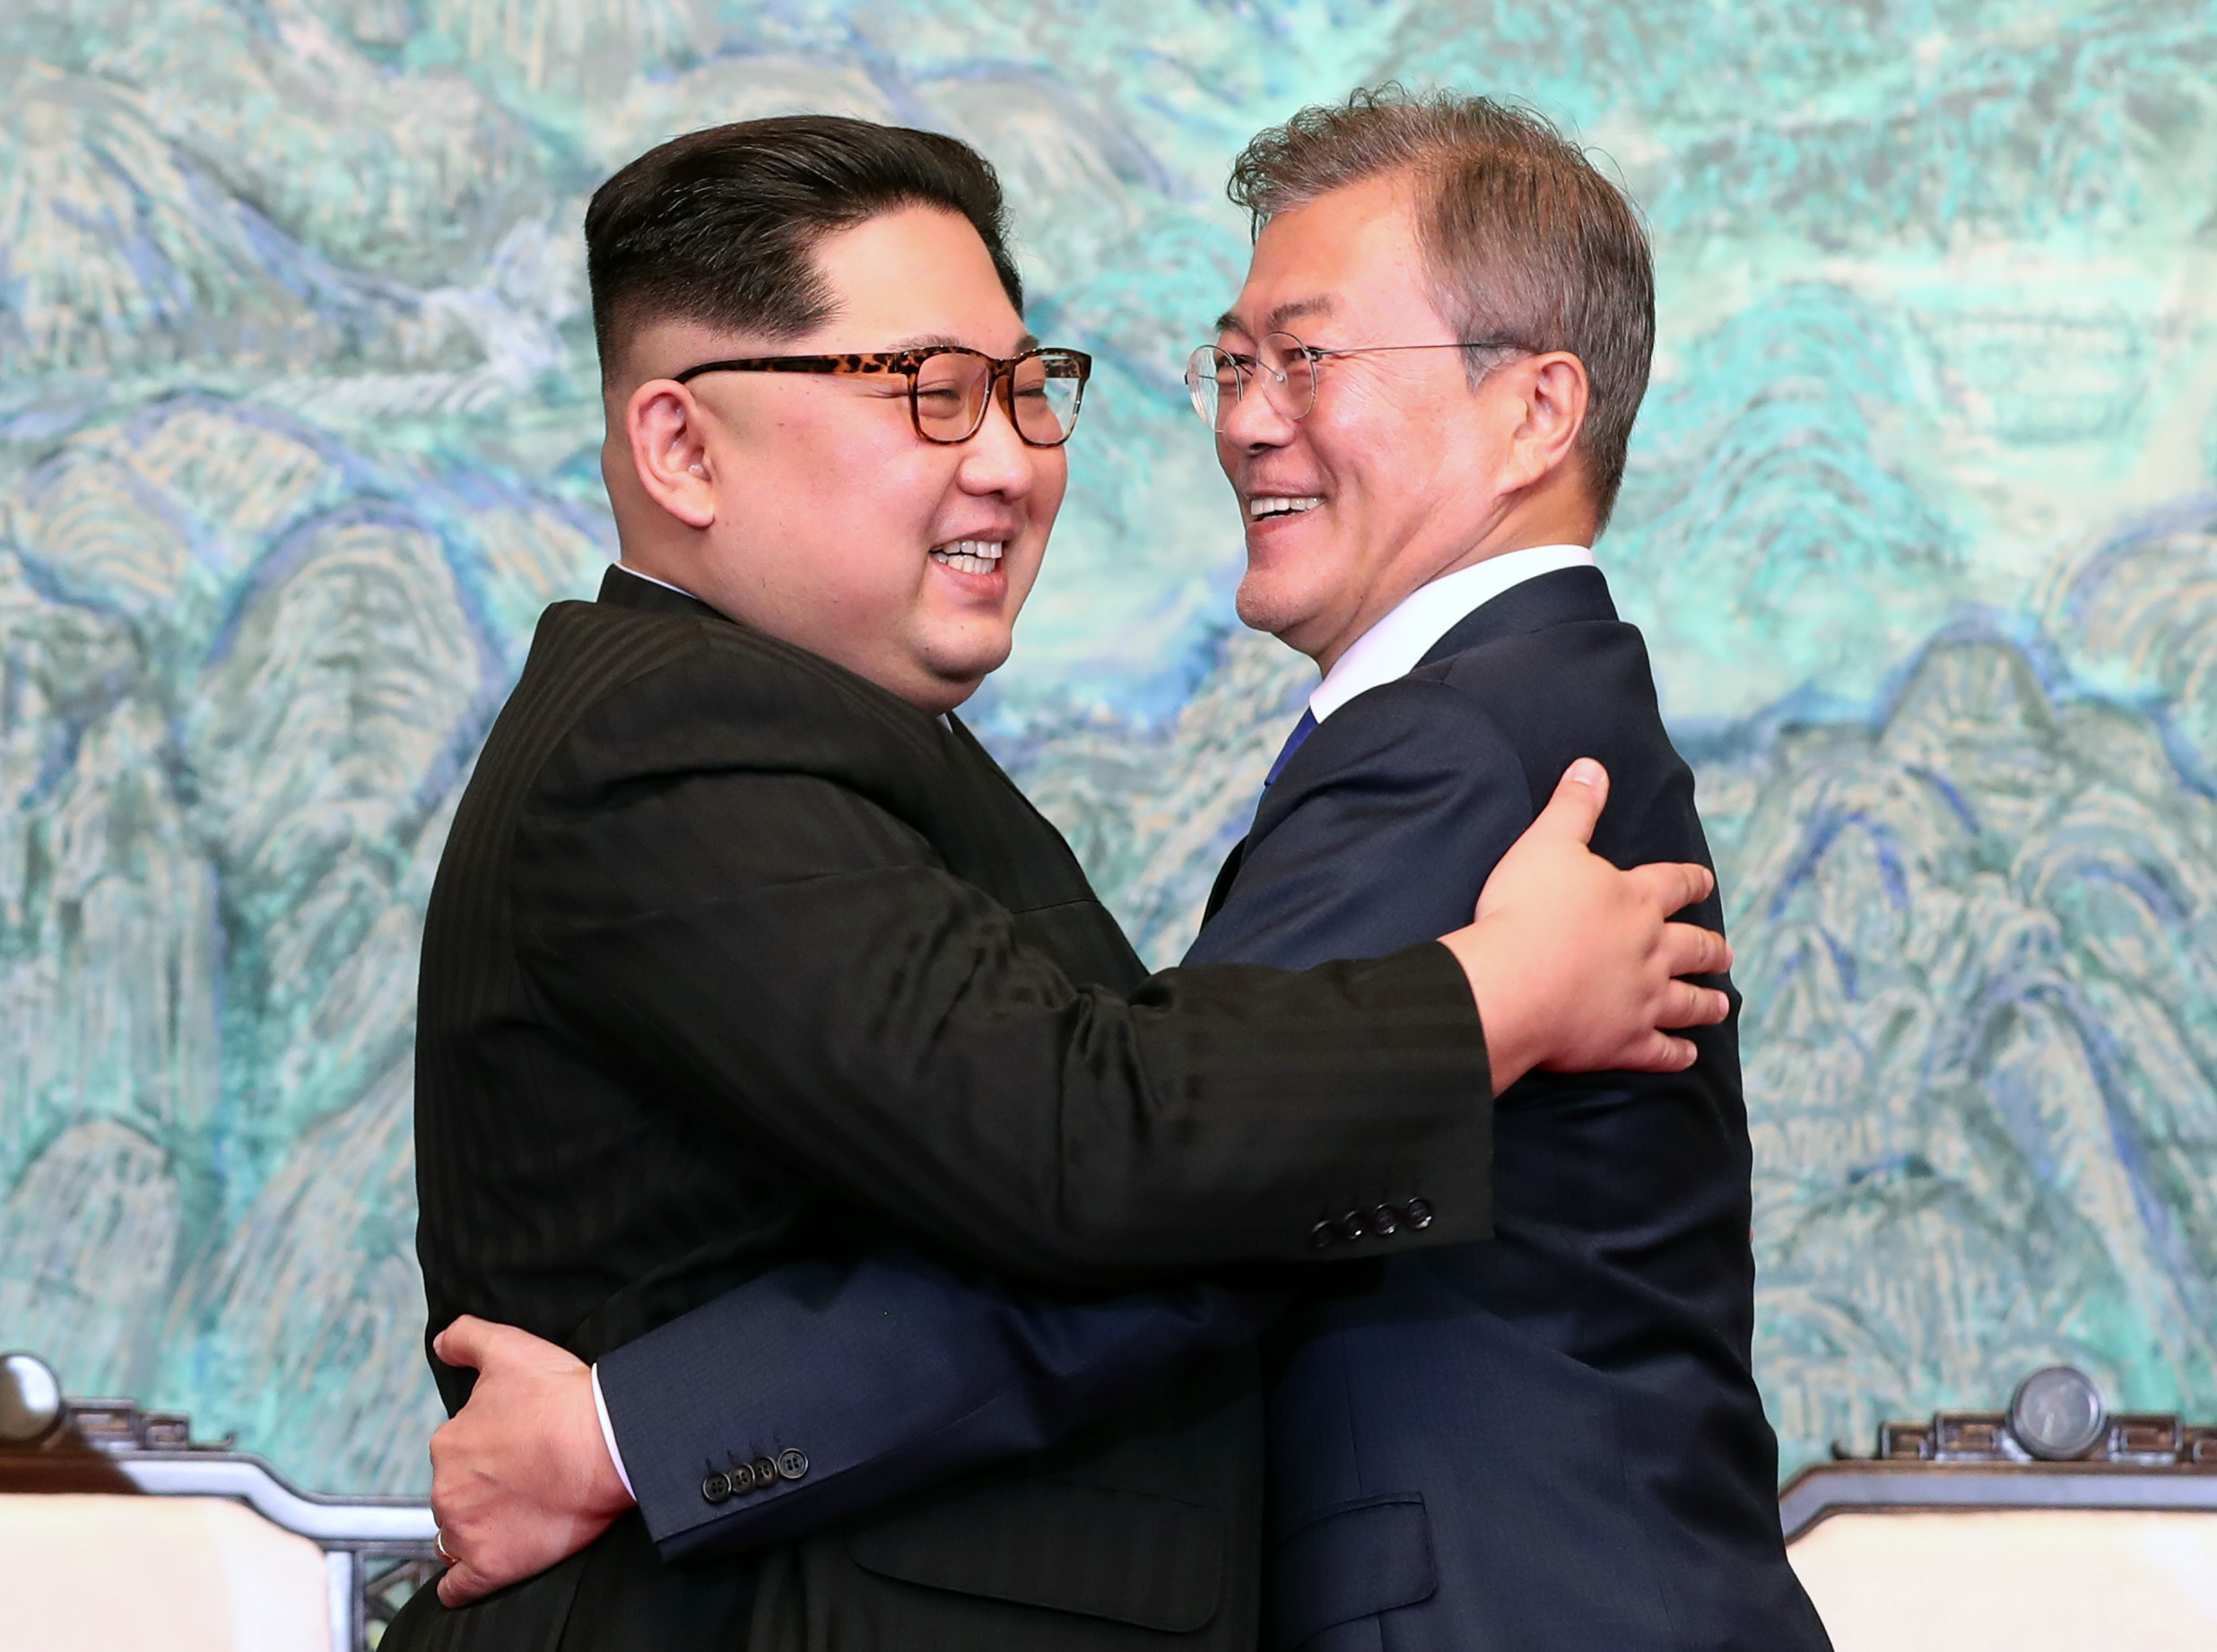 PANMUNJOM, SOUTH KOREA - APRIL 27: North Korean leader Kim Jong Un (L) and South Korean President Moon Jae-in (R) embrace after signing the Panmunjom Declaration for Peace, Prosperity and Unification of the Korean Peninsula during the Inter-Korean Summit at the Peace House on April 27, 2018 in Panmunjom, South Korea. Kim and Moon meet at the border today for the third-ever Inter-Korean summit talks after the 1945 division of the peninsula, and first since 2007 between then President Roh Moo-hyun of South Korea and Leader Kim Jong-il of North Korea. (Photo by Korea Summit Press Pool/Getty Images)